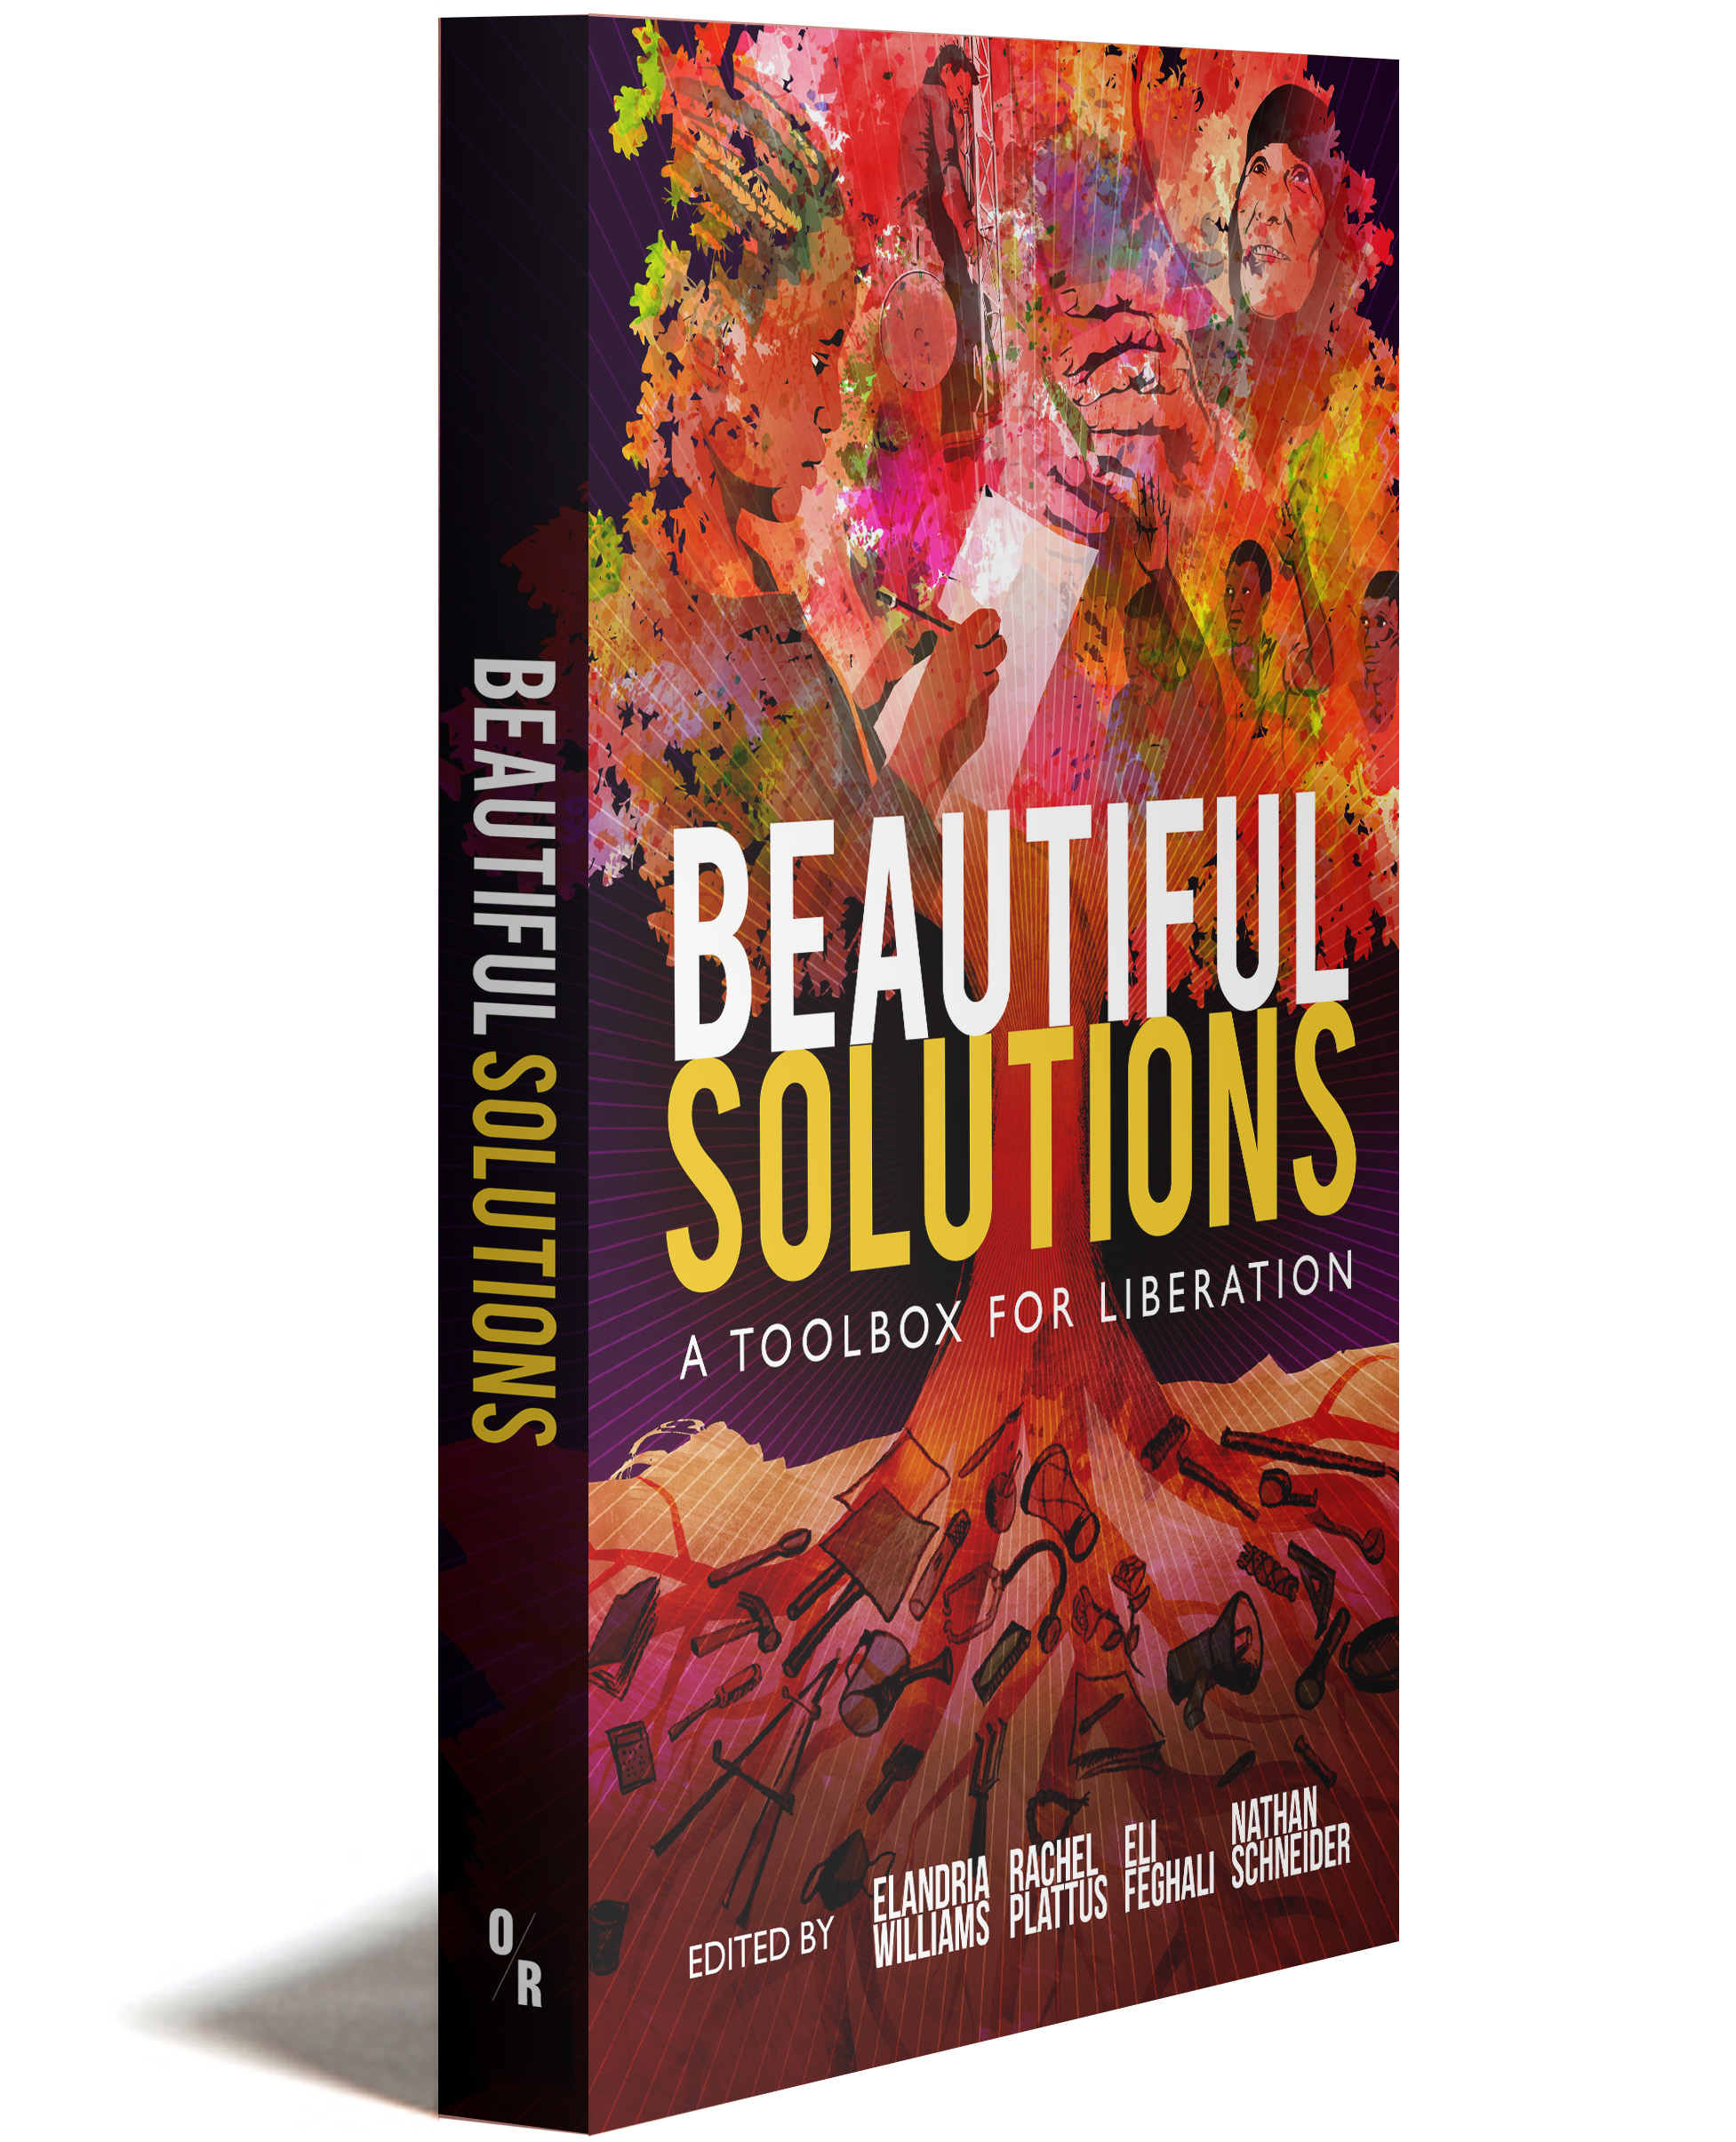 Beautiful Solutions is coming